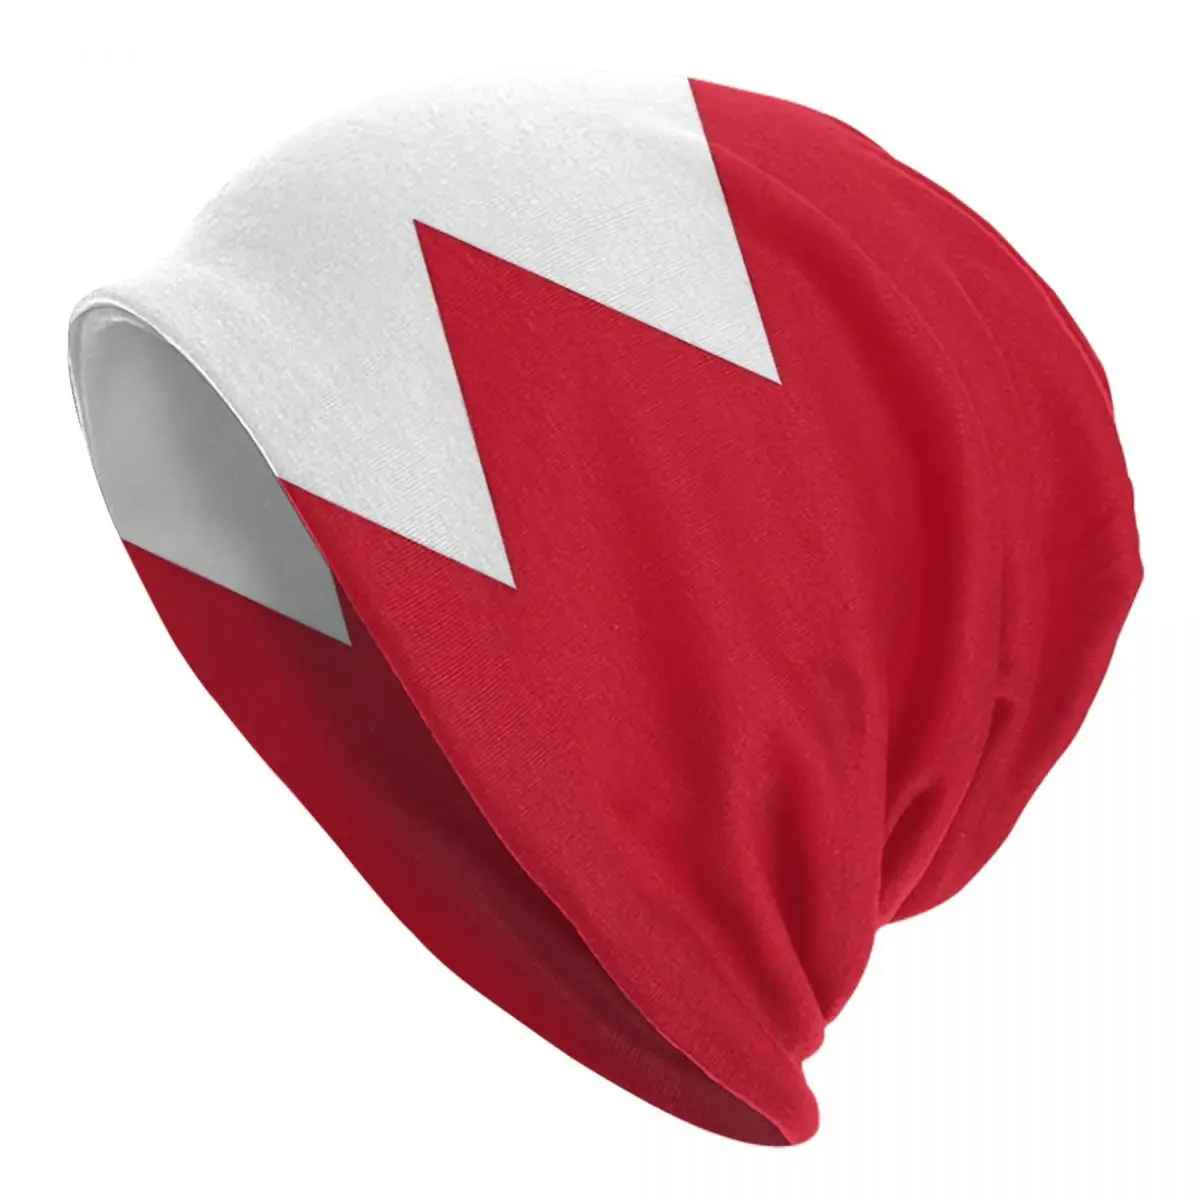 Bahrain Flag Adult Men's Women's Knit Hat Keep warm winter Funny knitted hat